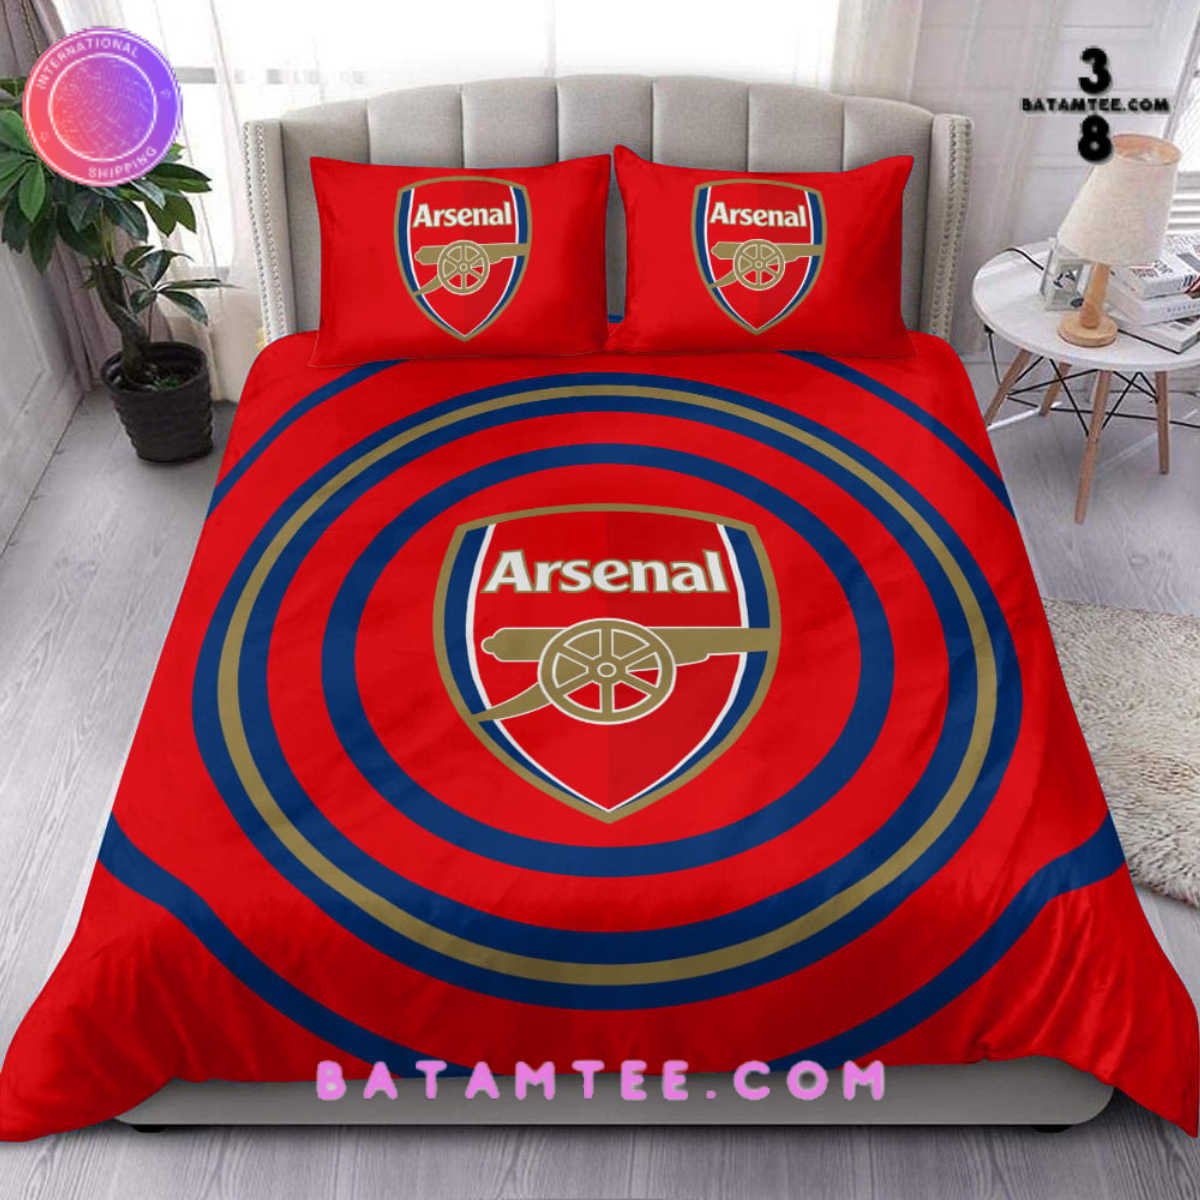 New Bedding Set collection for Arsenal fans-Limited Edition's Overview - Batamtee Shop - Threads & Totes: Your Style Destination